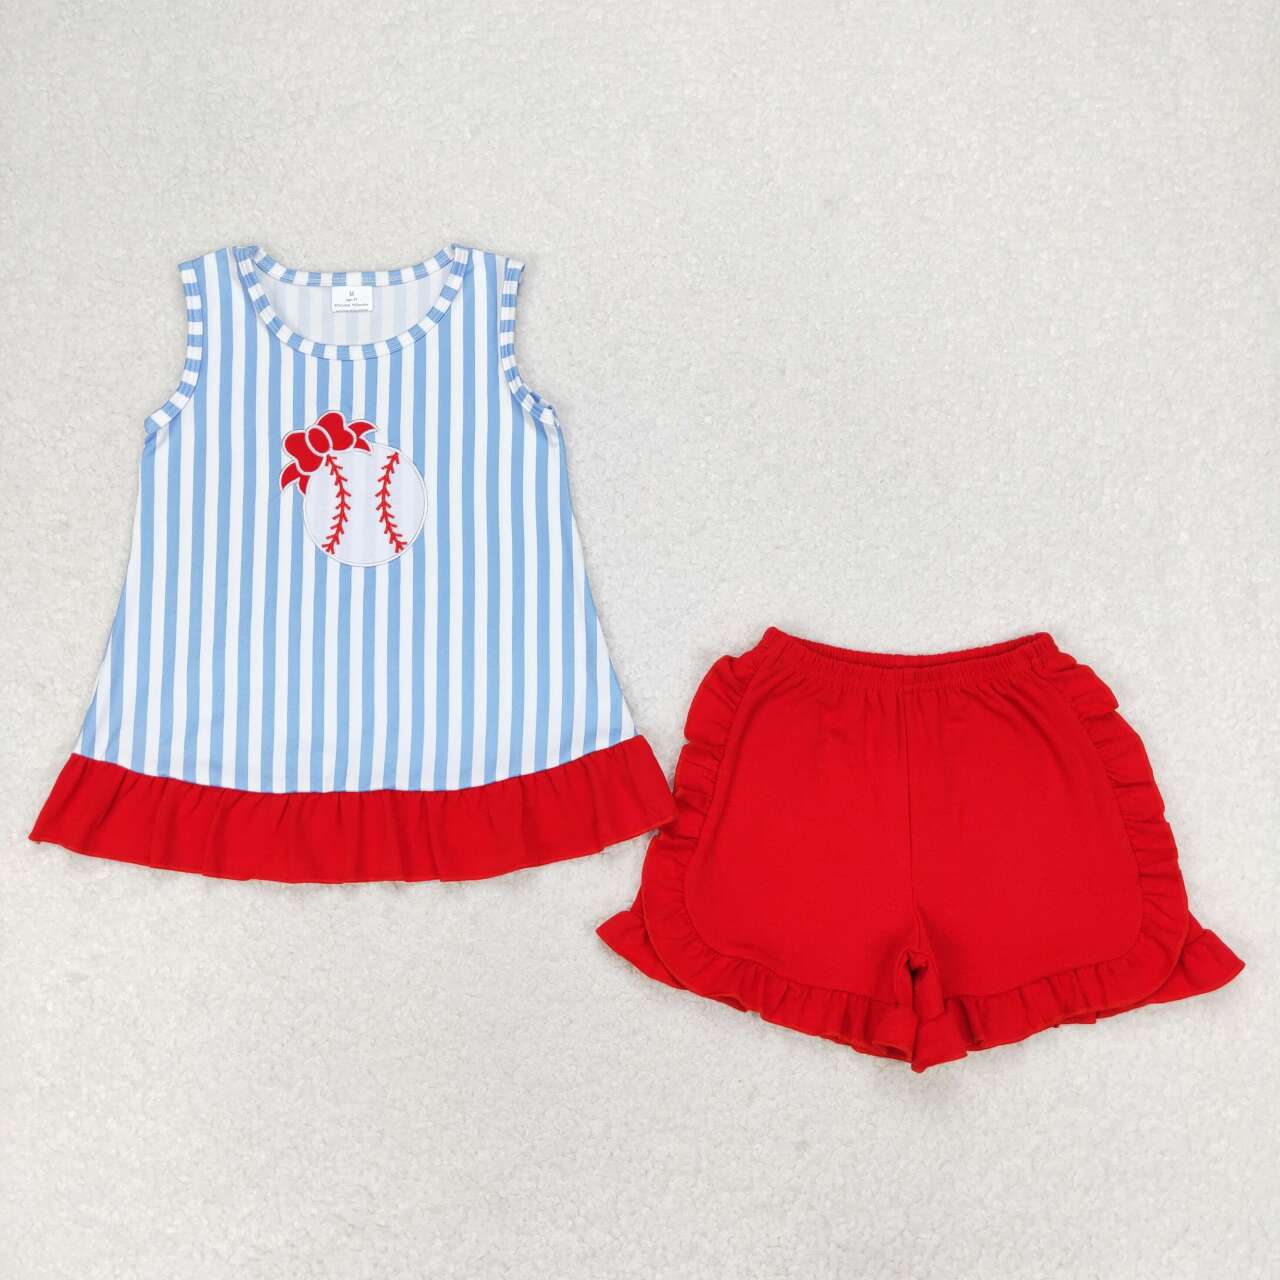 GSSO1019  Baseball Embroidery Blue Stripes Top Red Shorts Girls Summer Clothes Set